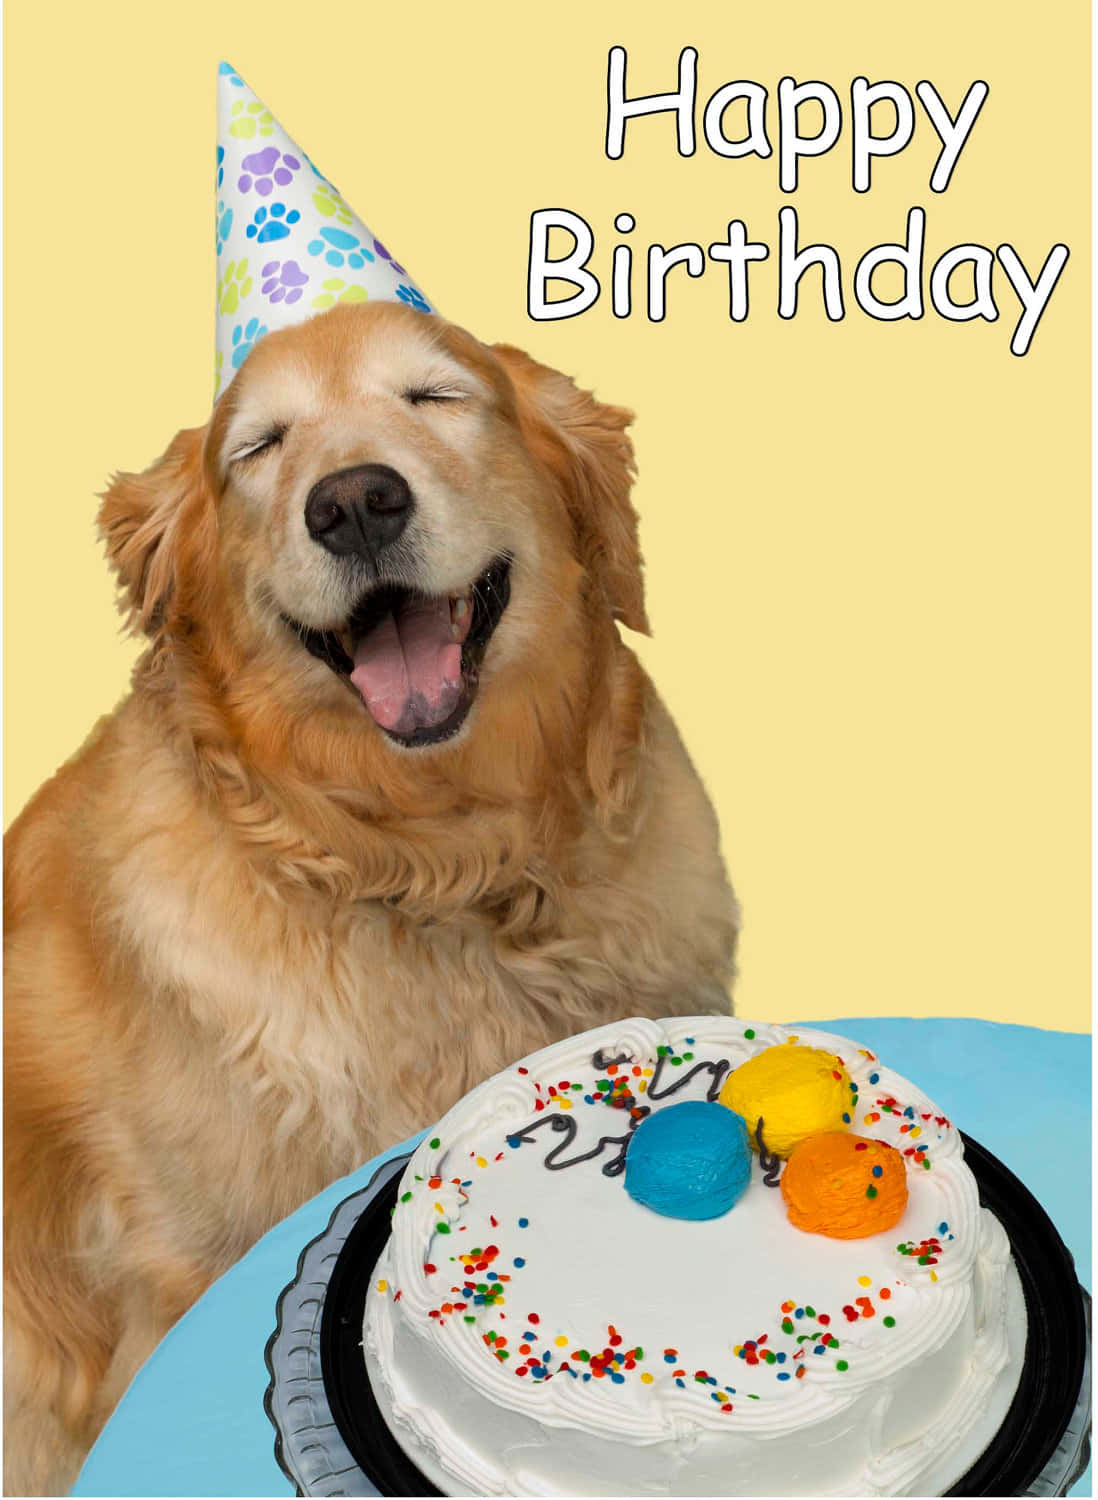 Dog Birthday Smiling Golden Retriever Party Cake Picture